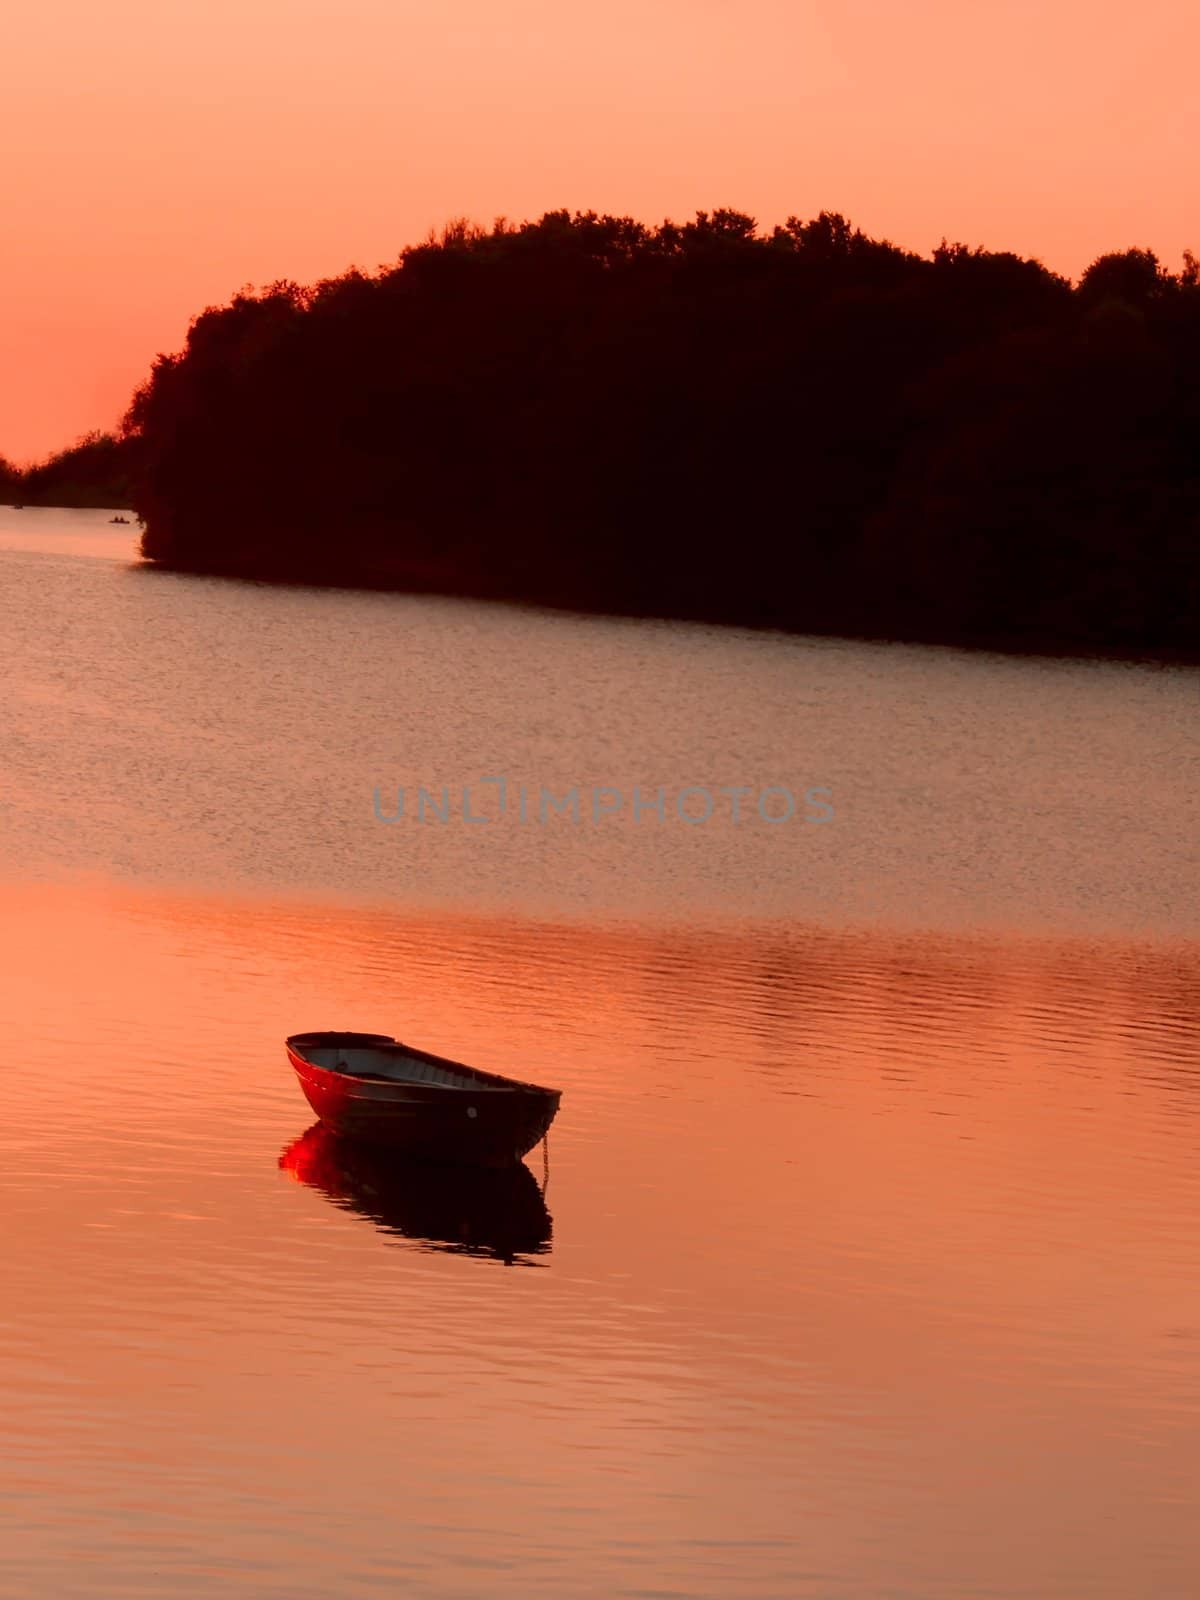 Anchored boat in the reservoir after sunset in quiet summer weather. Khmelnitsky, Ukraine